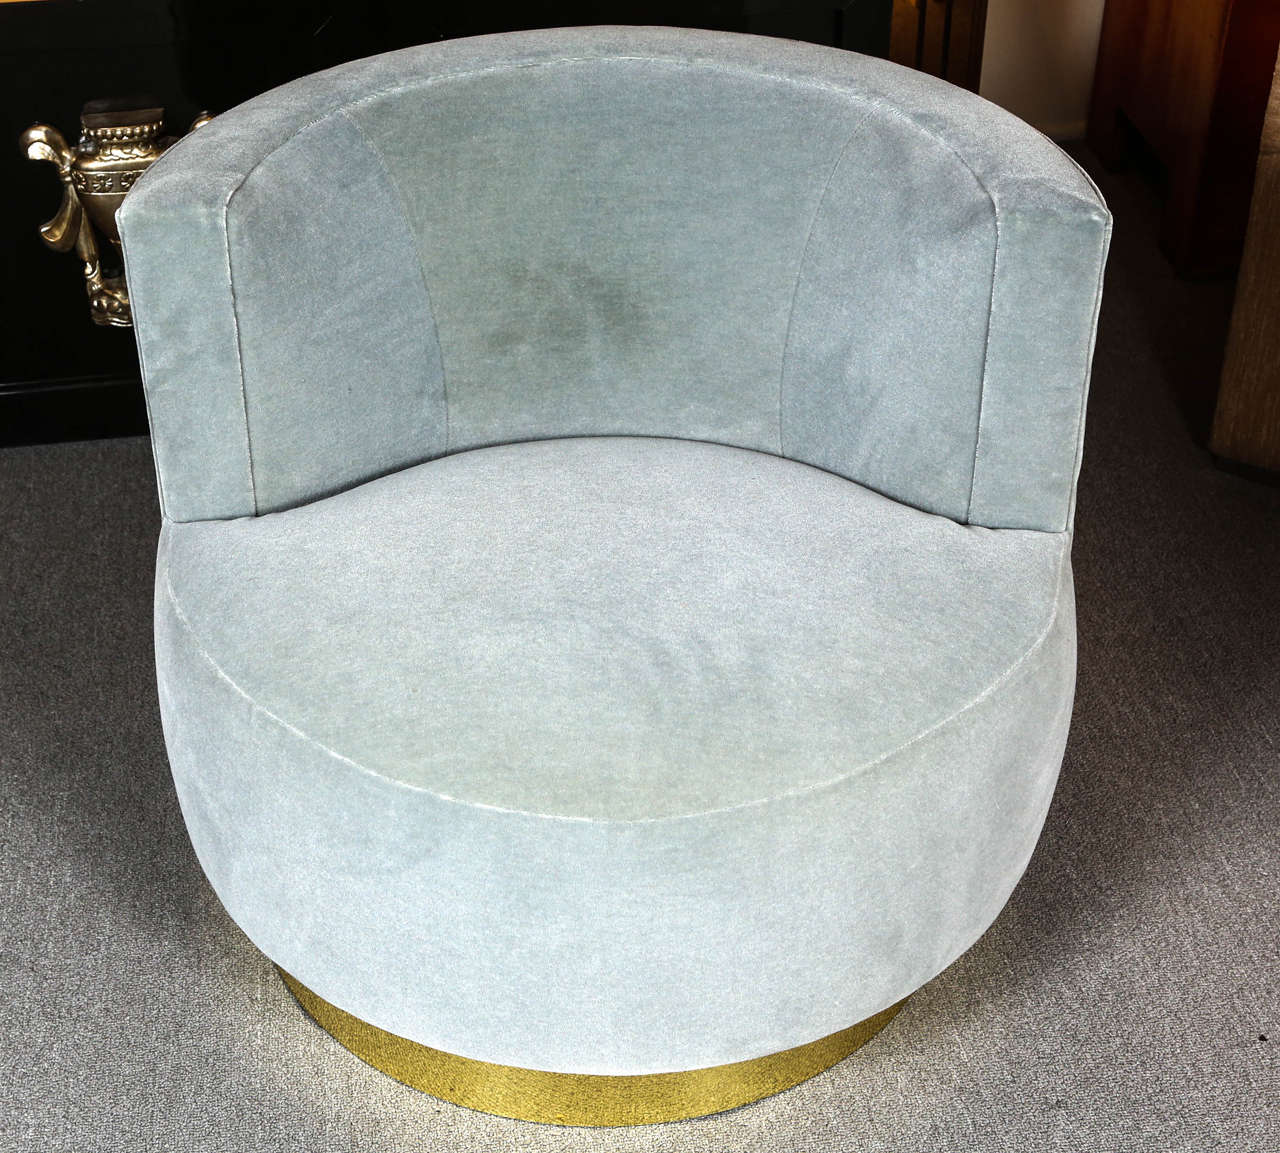 Pair of elegant swivel chairs designed by Steve Chase.
The chairs have been beautifully reupholstered in luxurious mohair fabric, and
have polished brass bands.